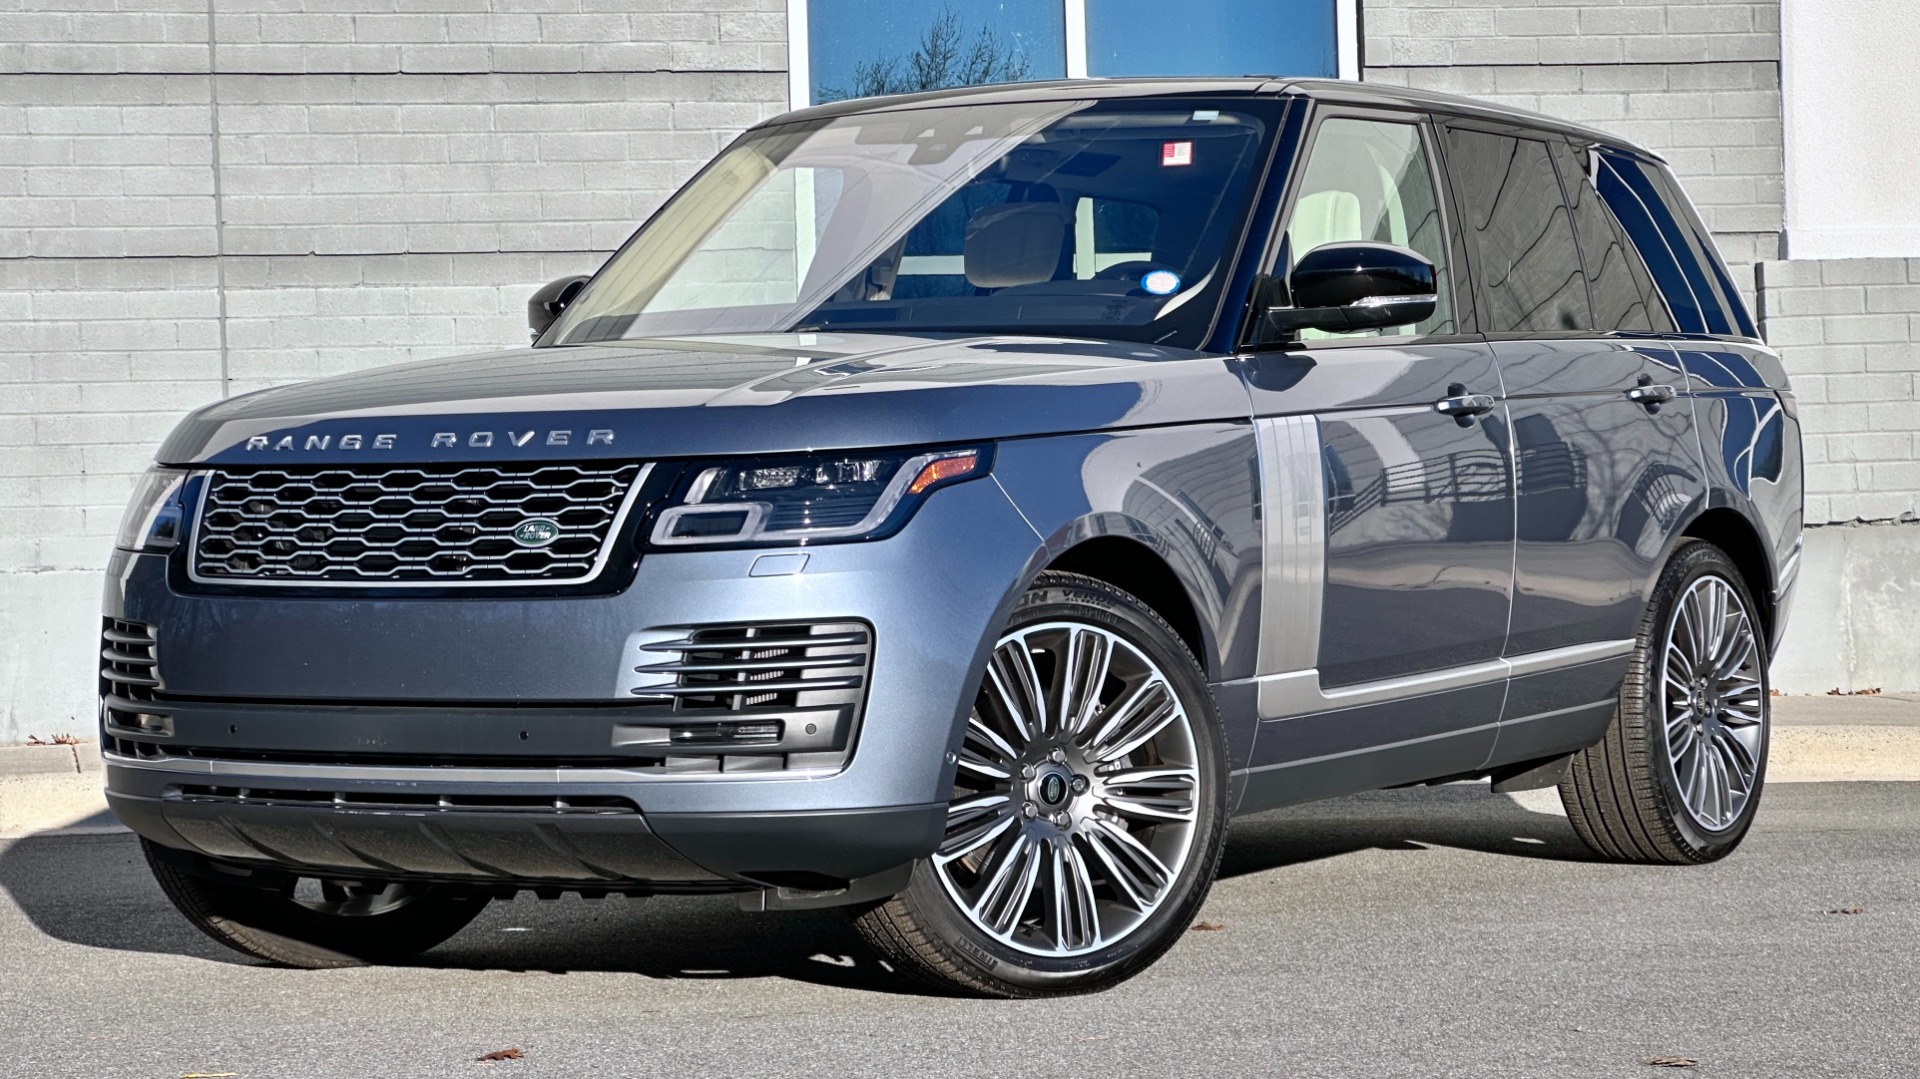 Used 2022 Land Rover Range Rover WESTMINISTER / MASSAGE / BLACK ROOF / 22IN WHEELS / REAR CONVENIENCE for sale $119,999 at Formula Imports in Charlotte NC 28227 1